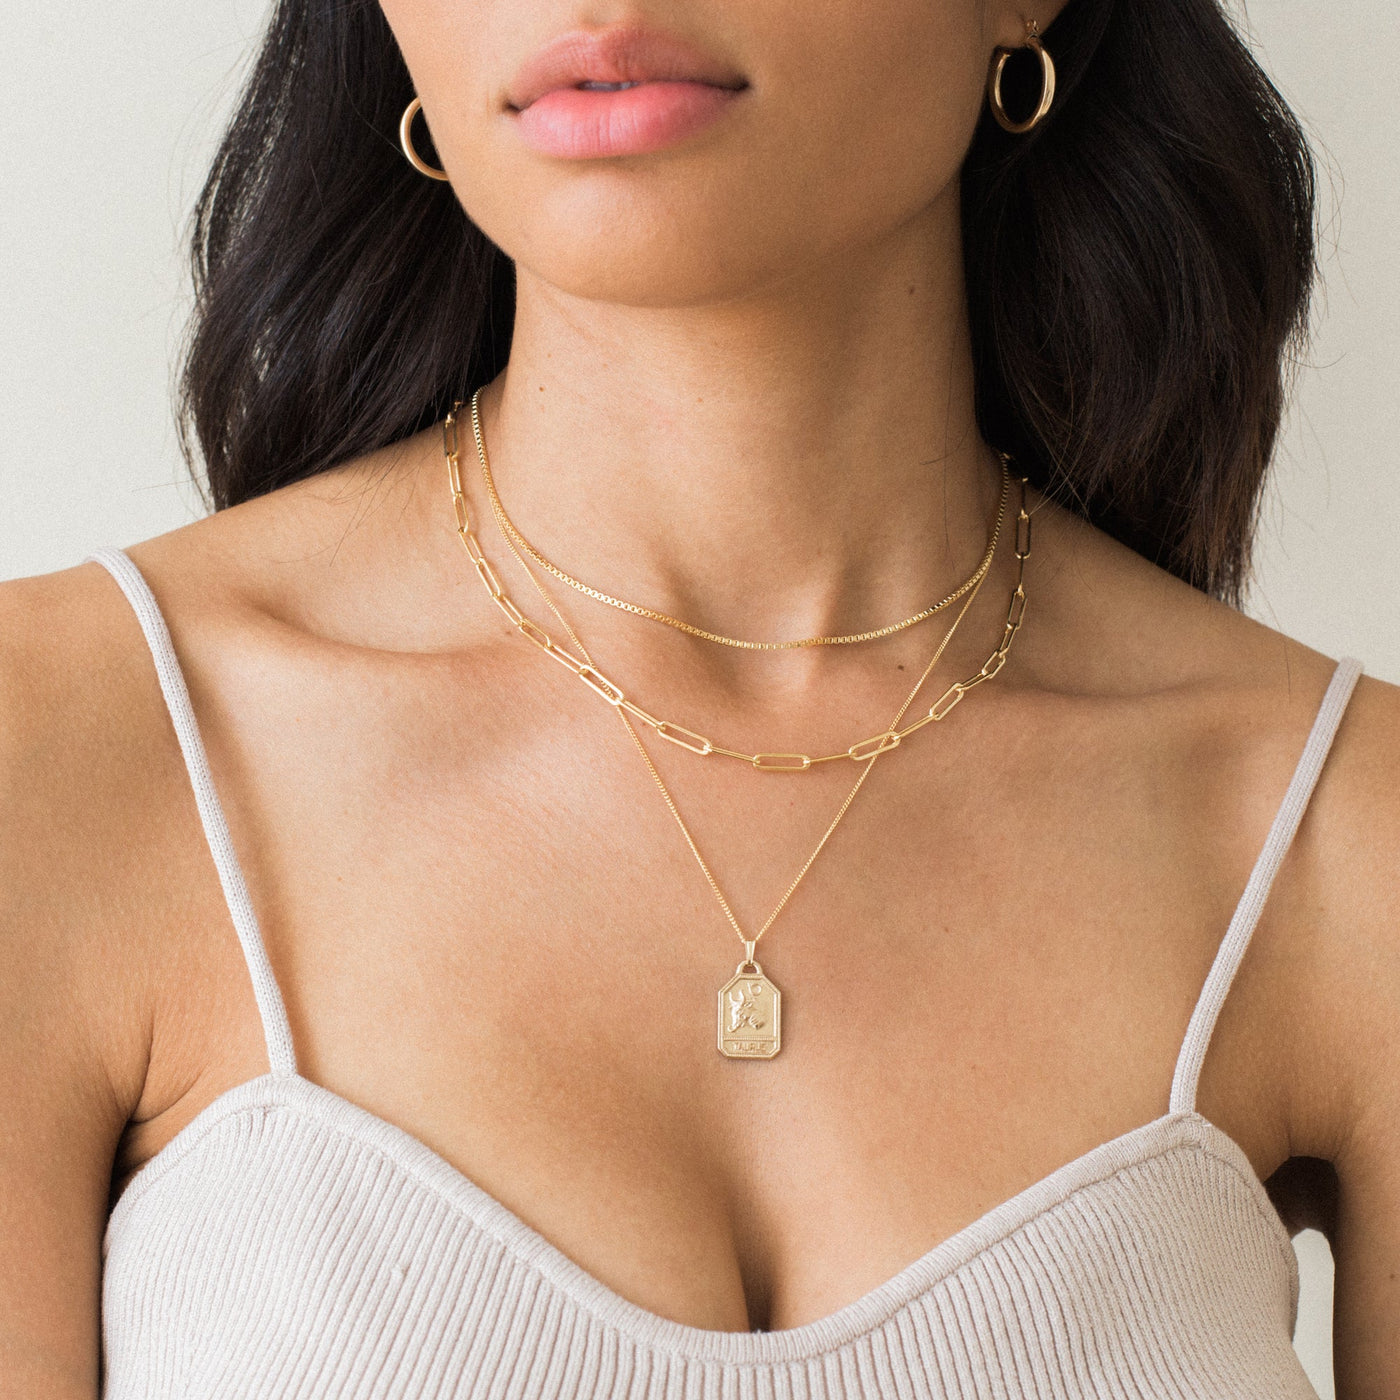 Chunky Paperclip Necklace | Simple & Dainty Jewelry